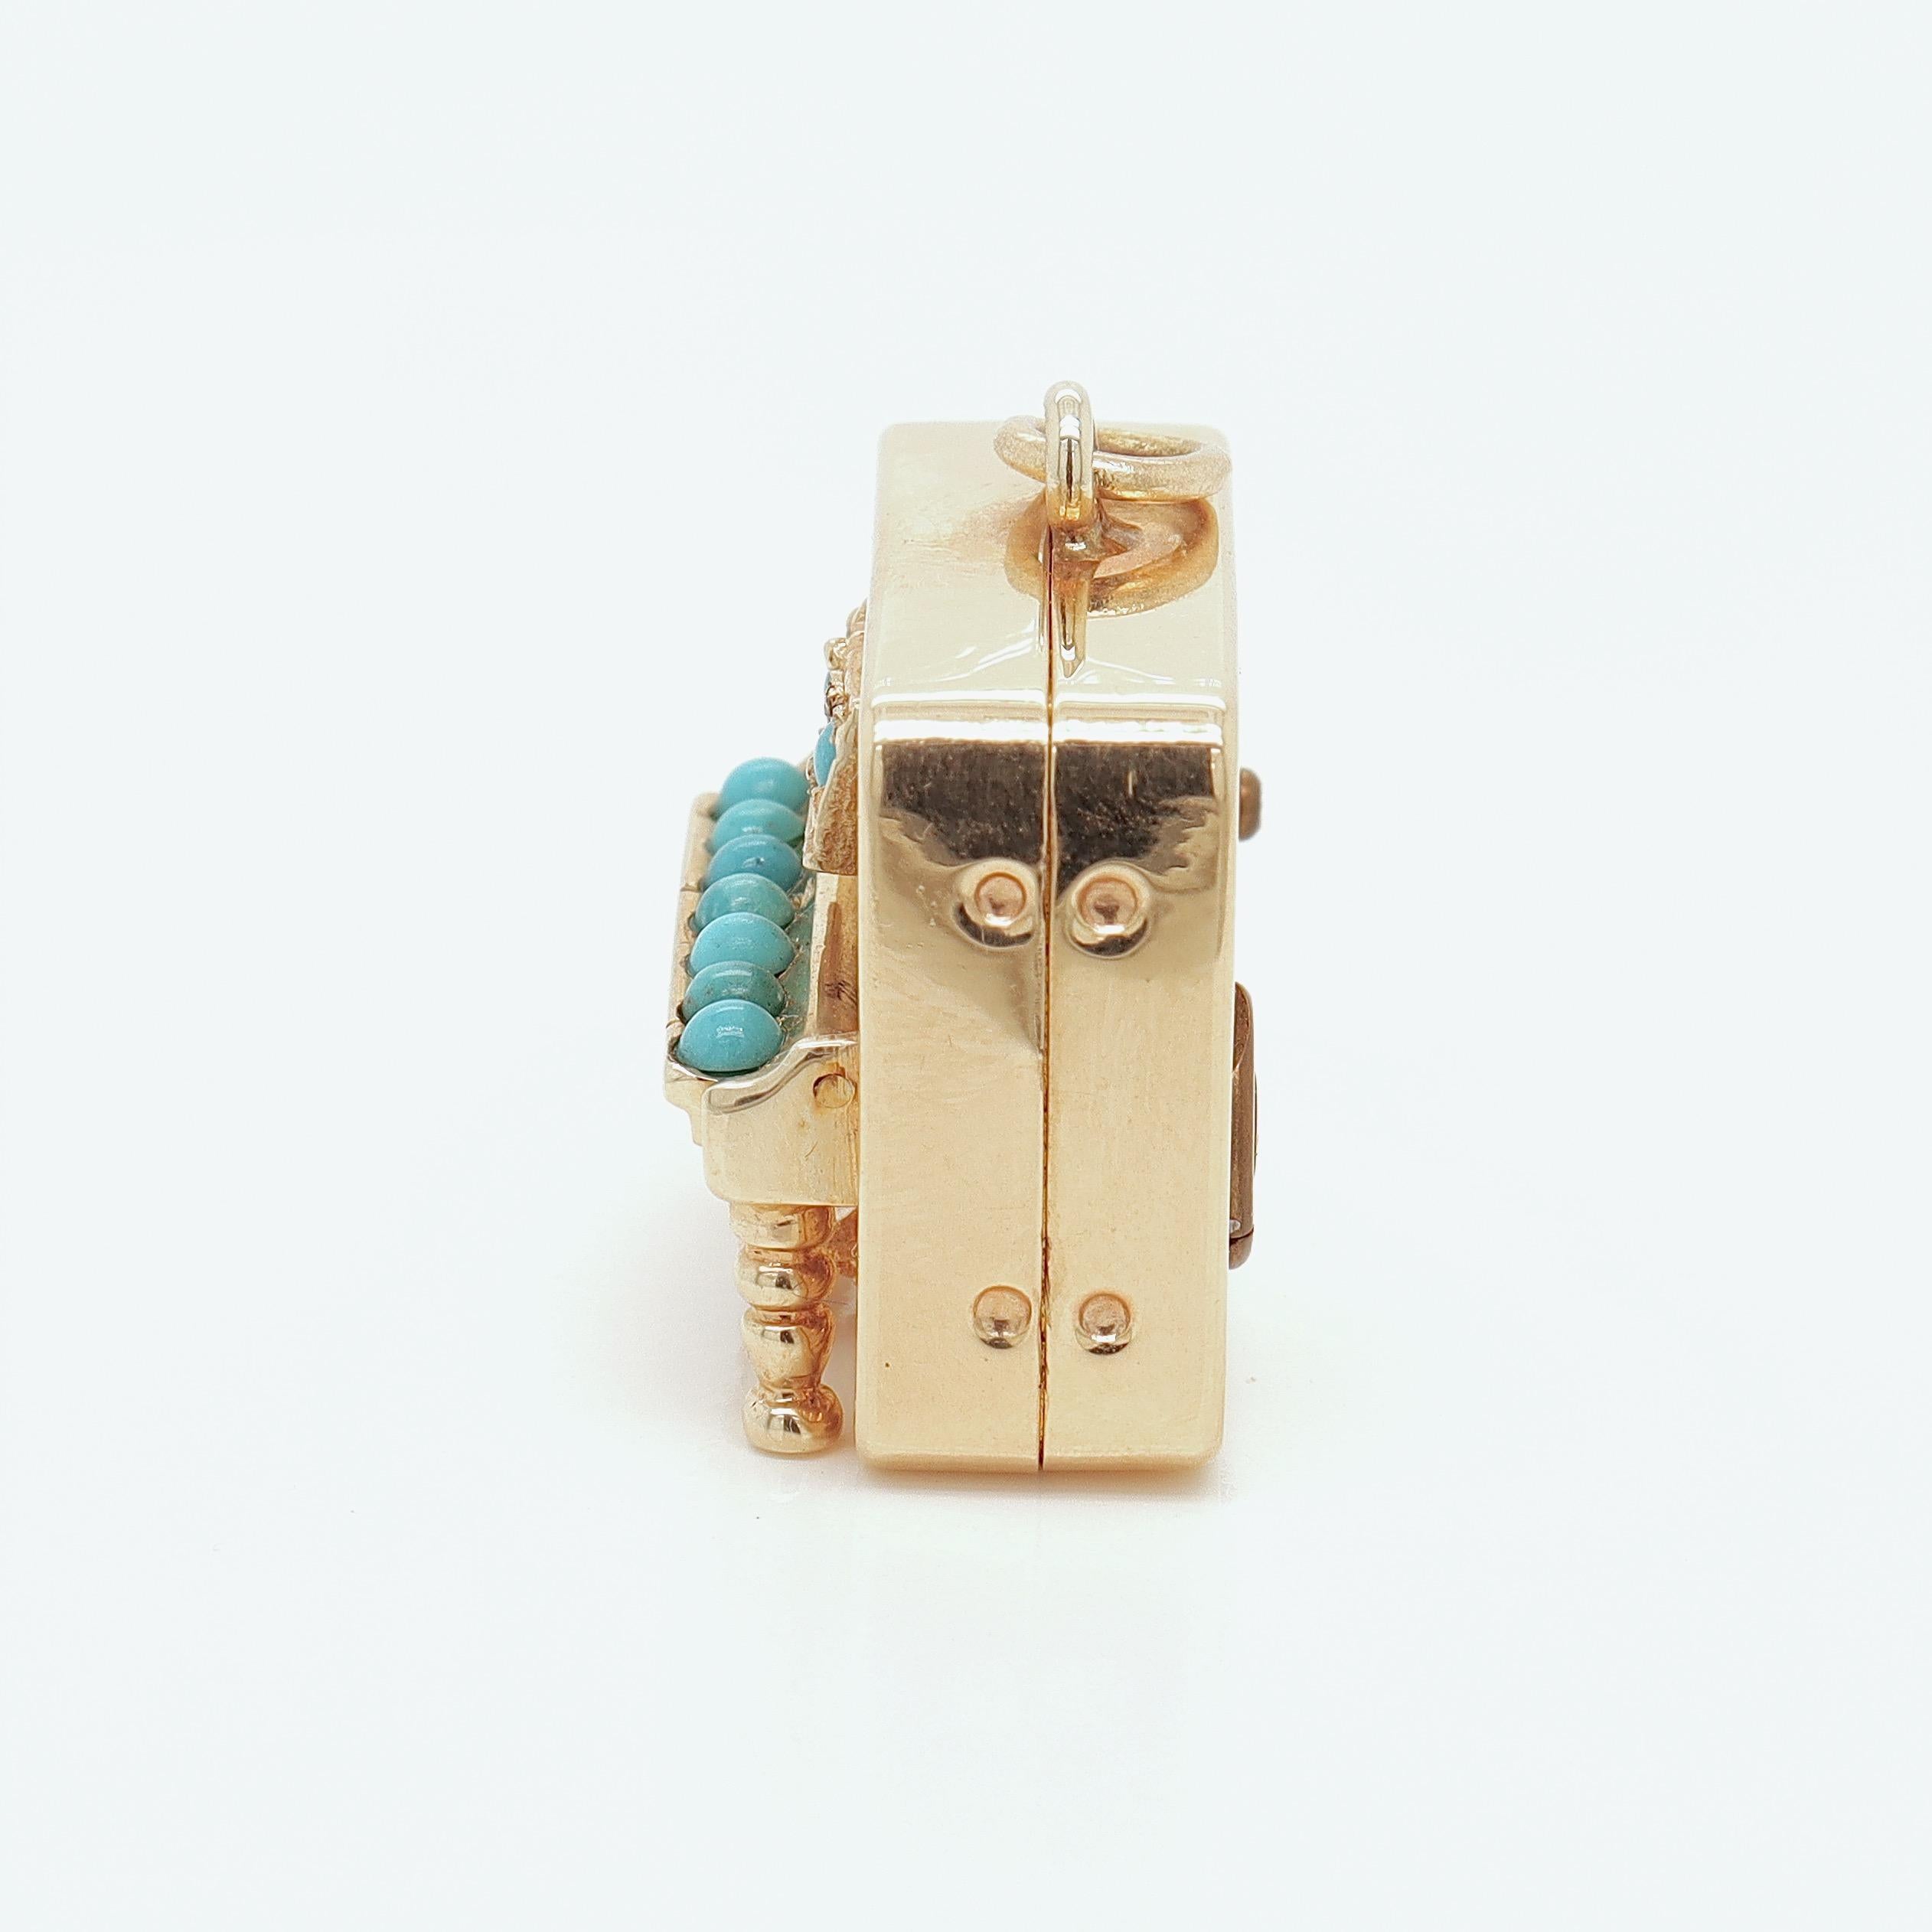 Round Cut Mid-Century 14K Gold & Turquoise Mechanical Musical Piano Charm for a Bracelet